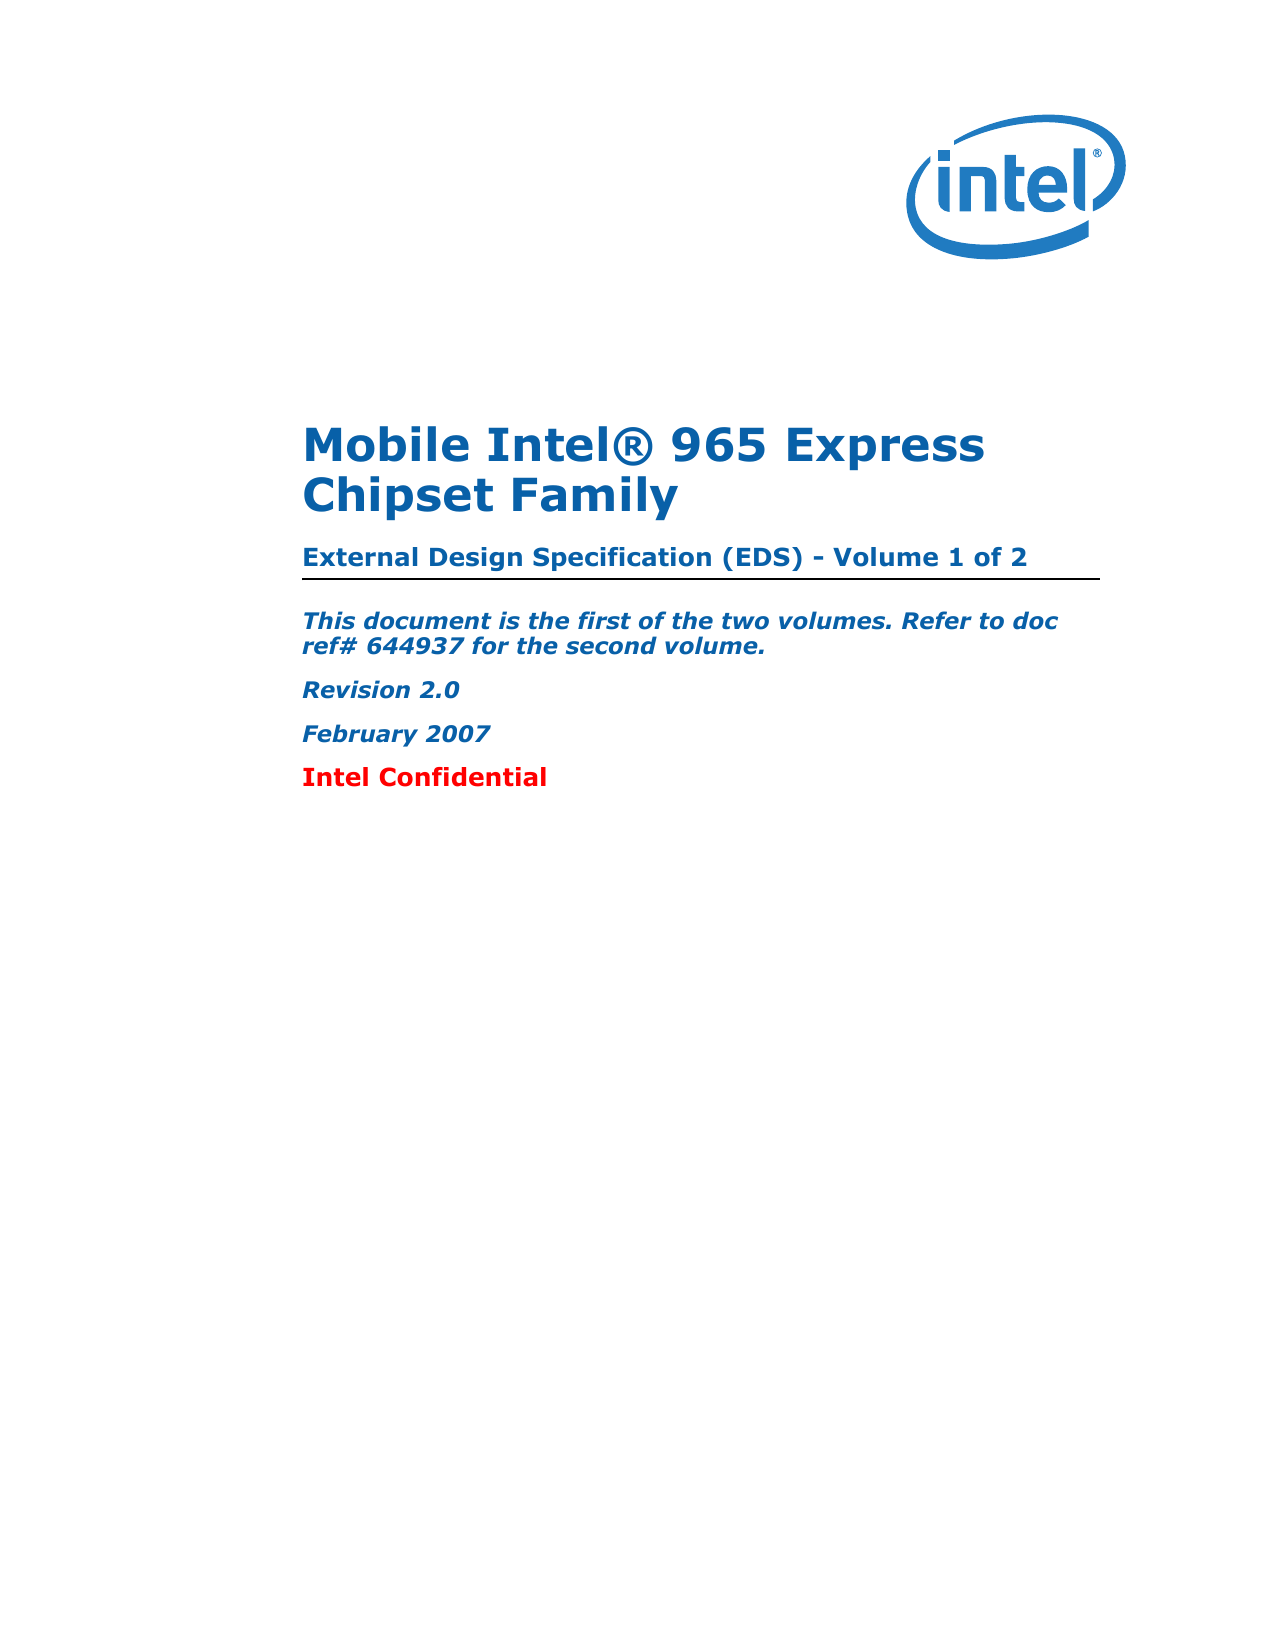 install mobile intel 965 express chipset family cmd